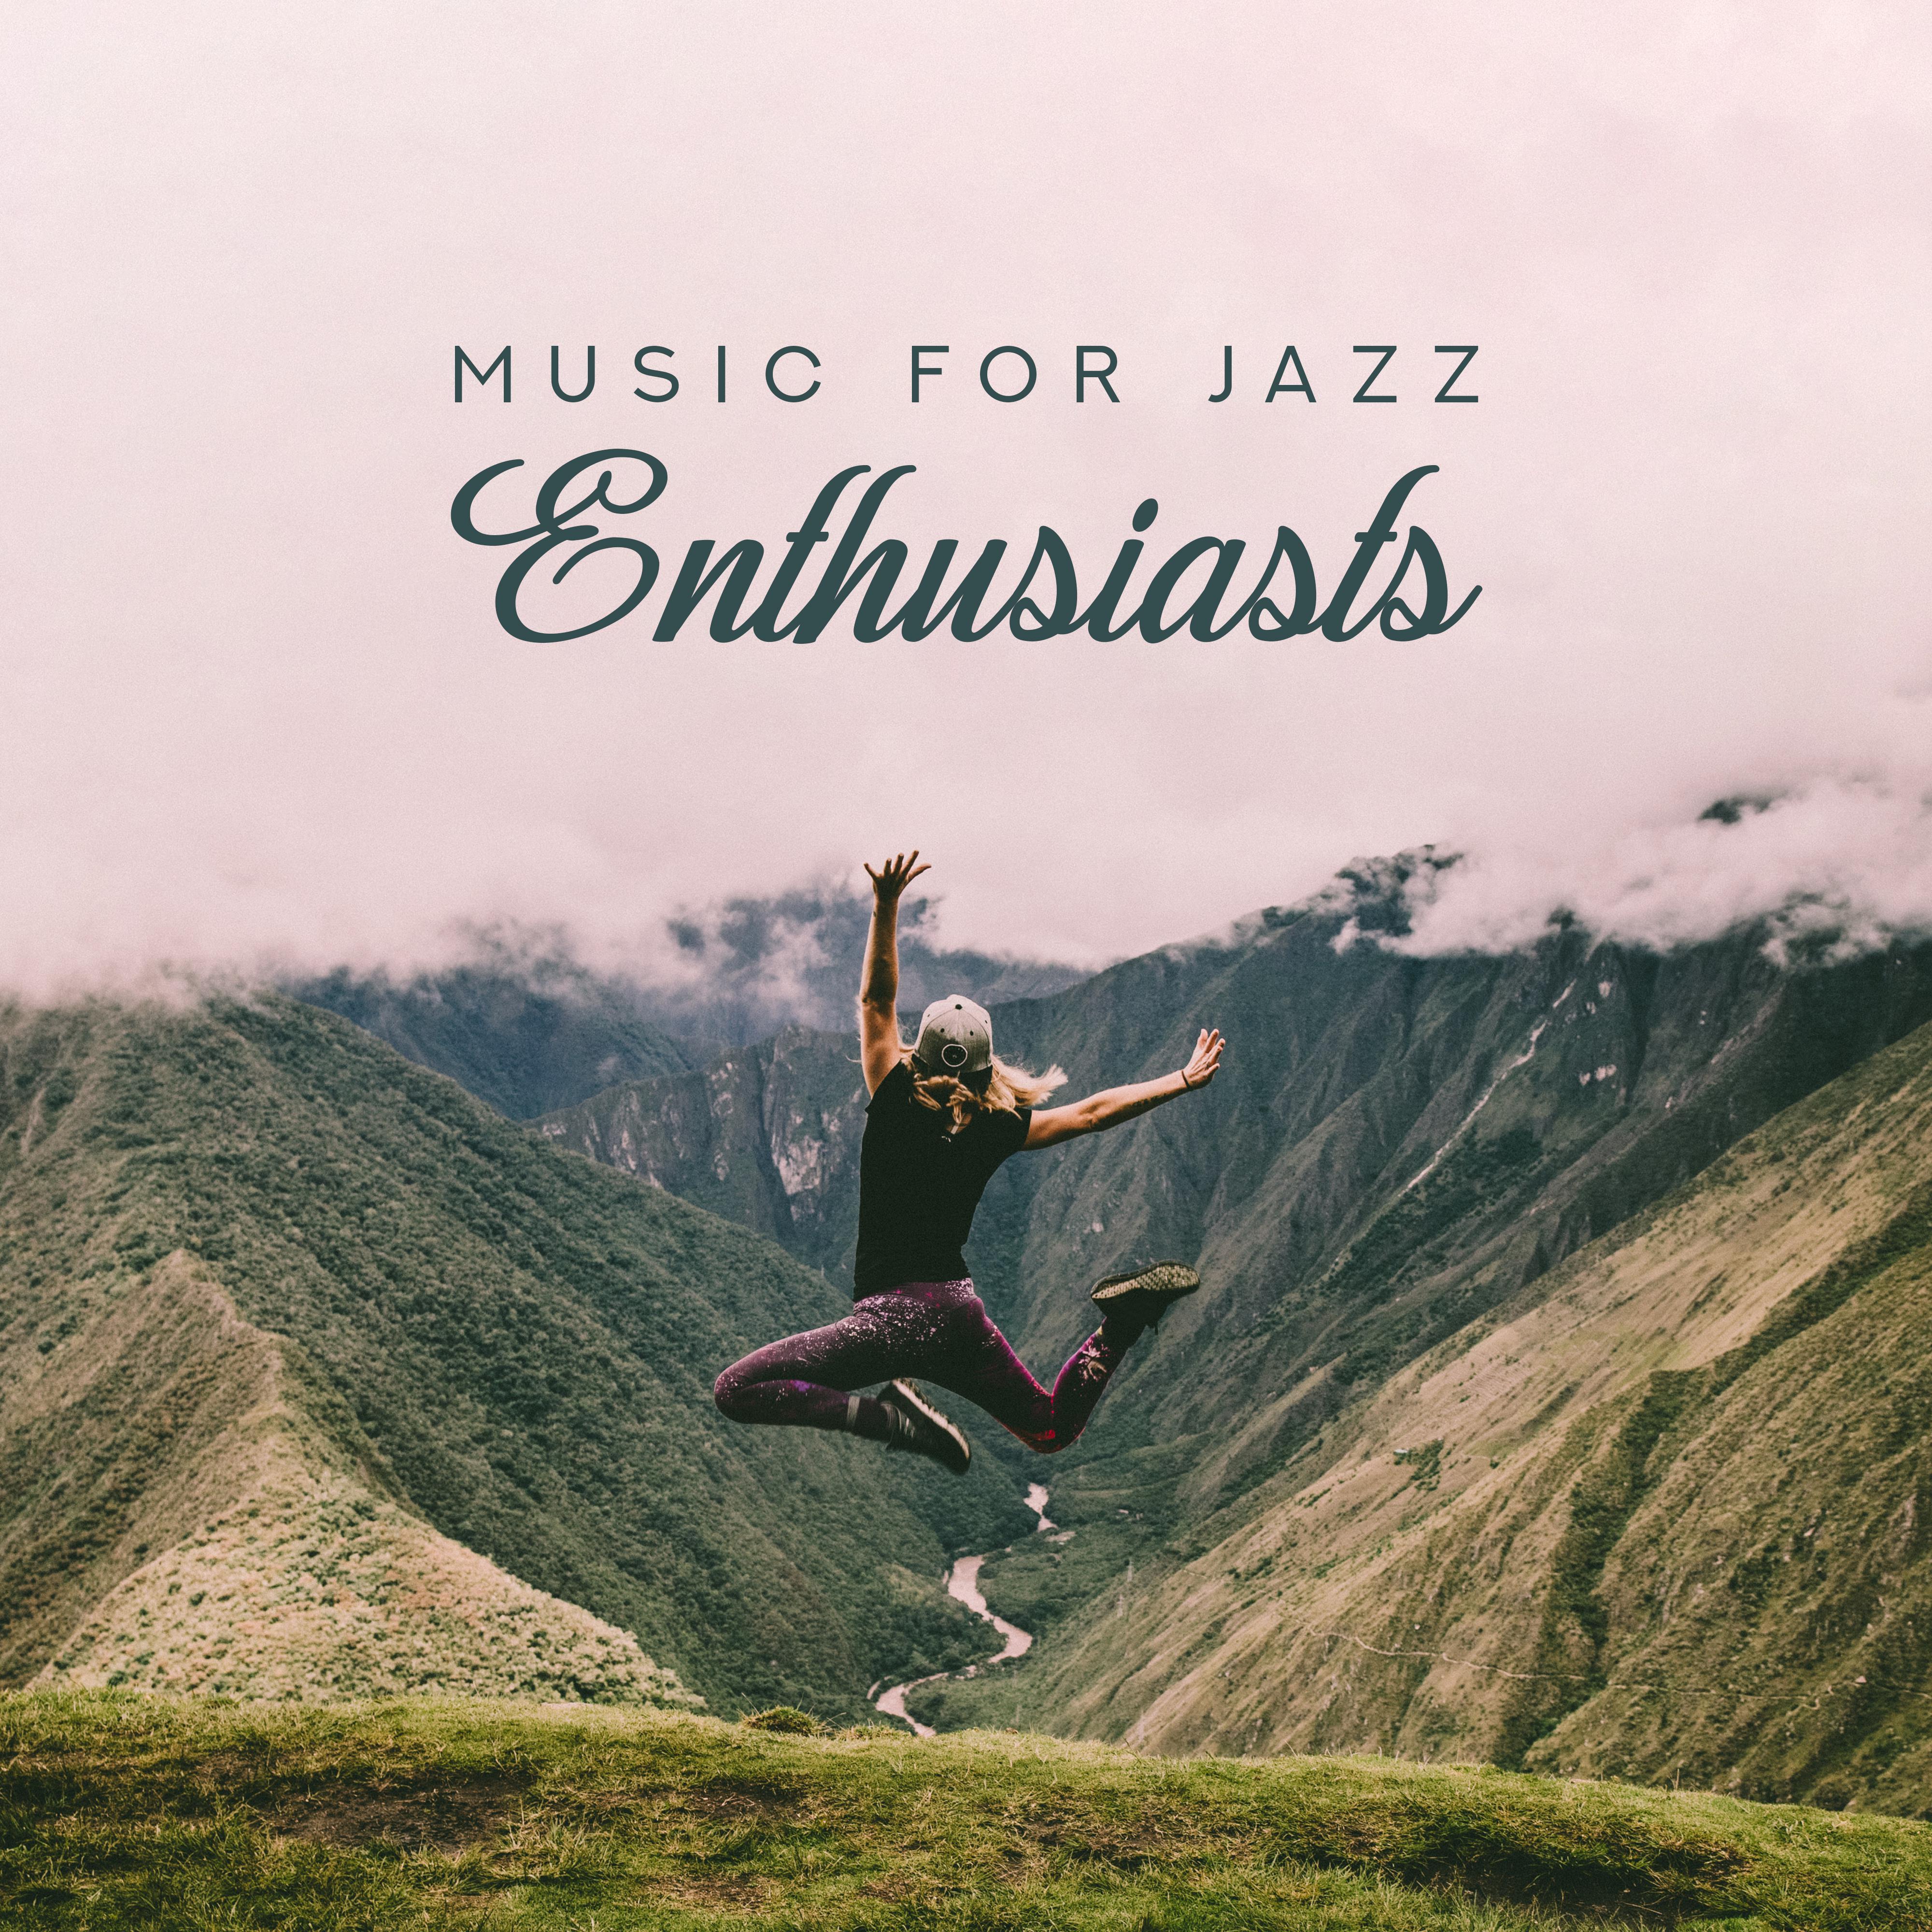 Music for Jazz Enthusiasts - 15 Instrumental Jazz Pieces from 2019